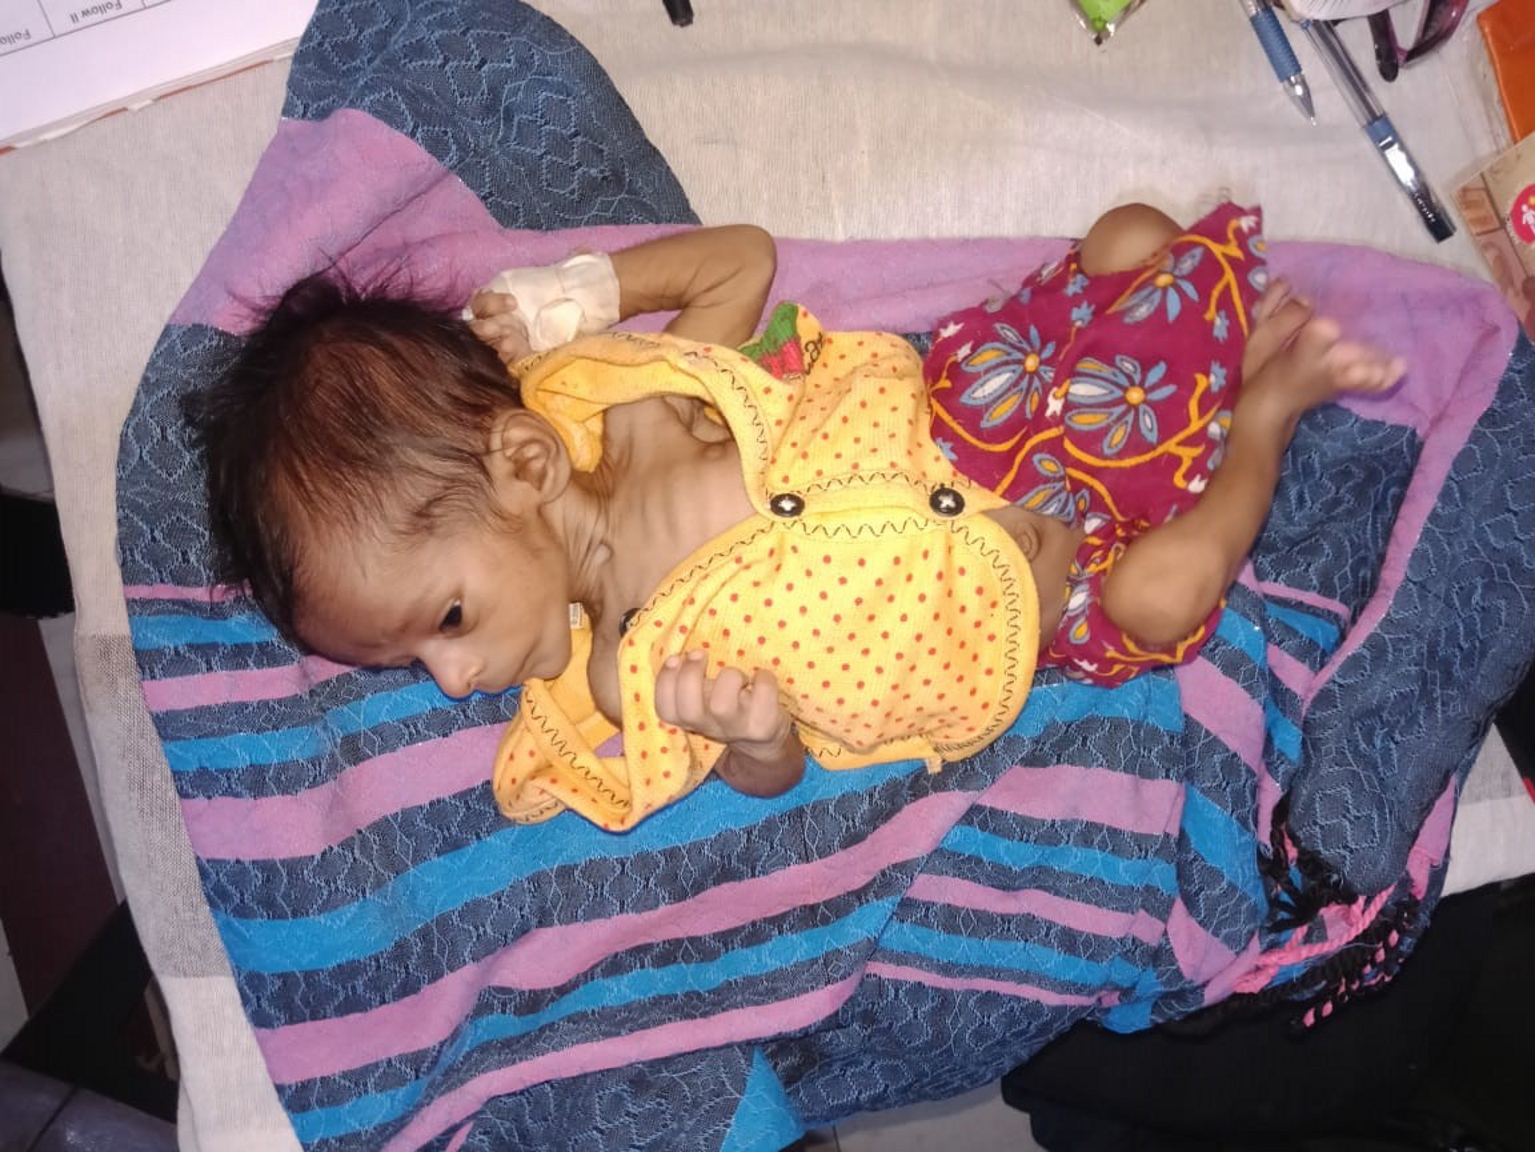 Mother brought malnourished child to NRC hospital